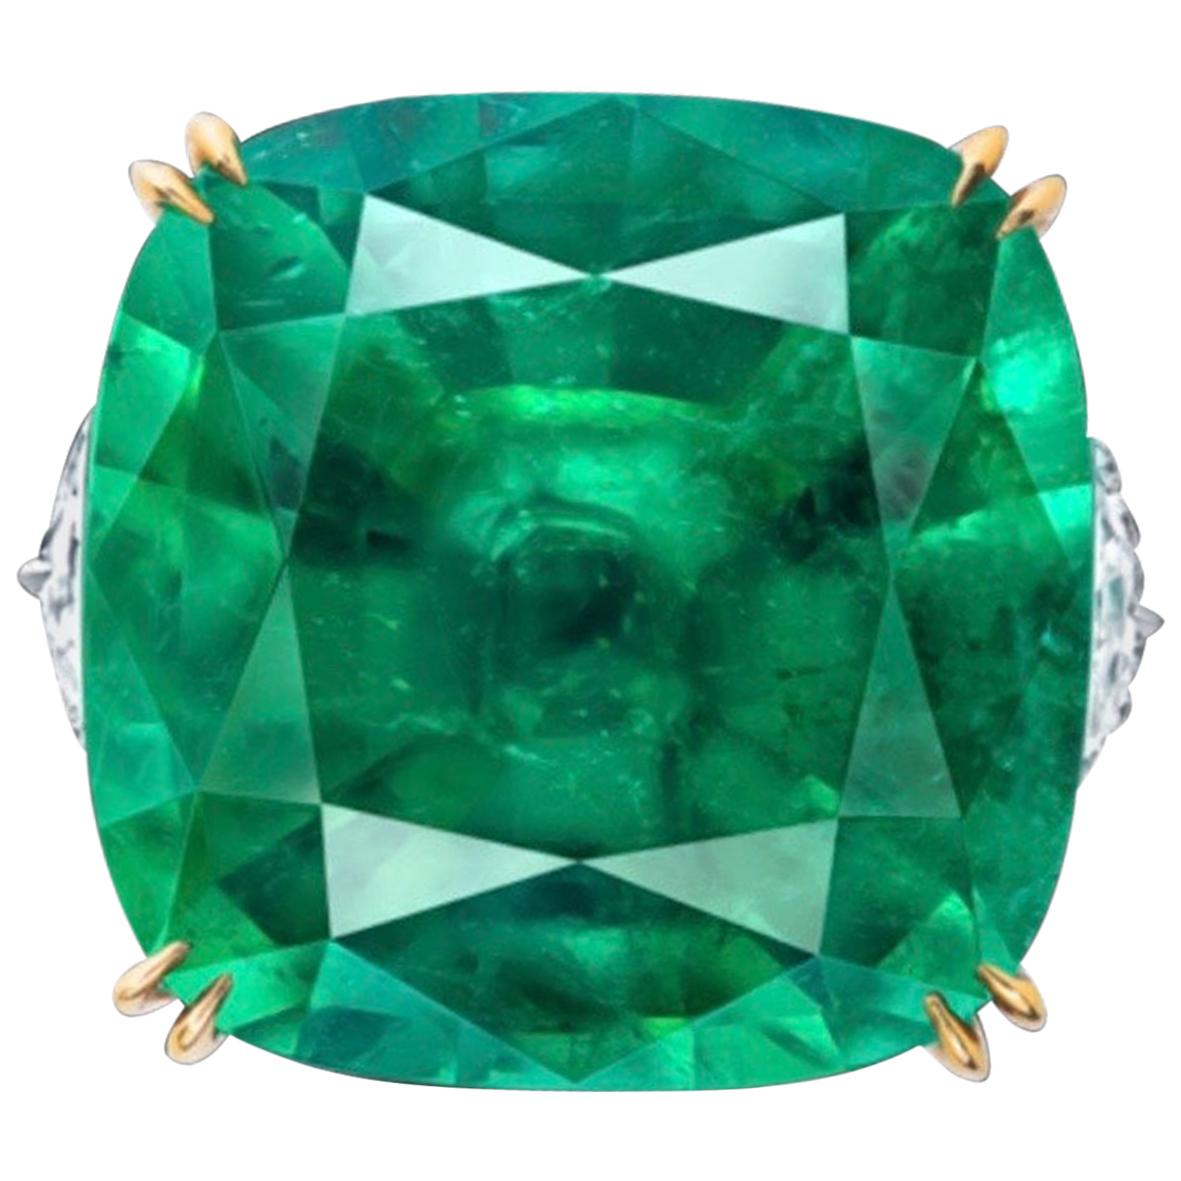 How do I tell if an emerald has been oiled?